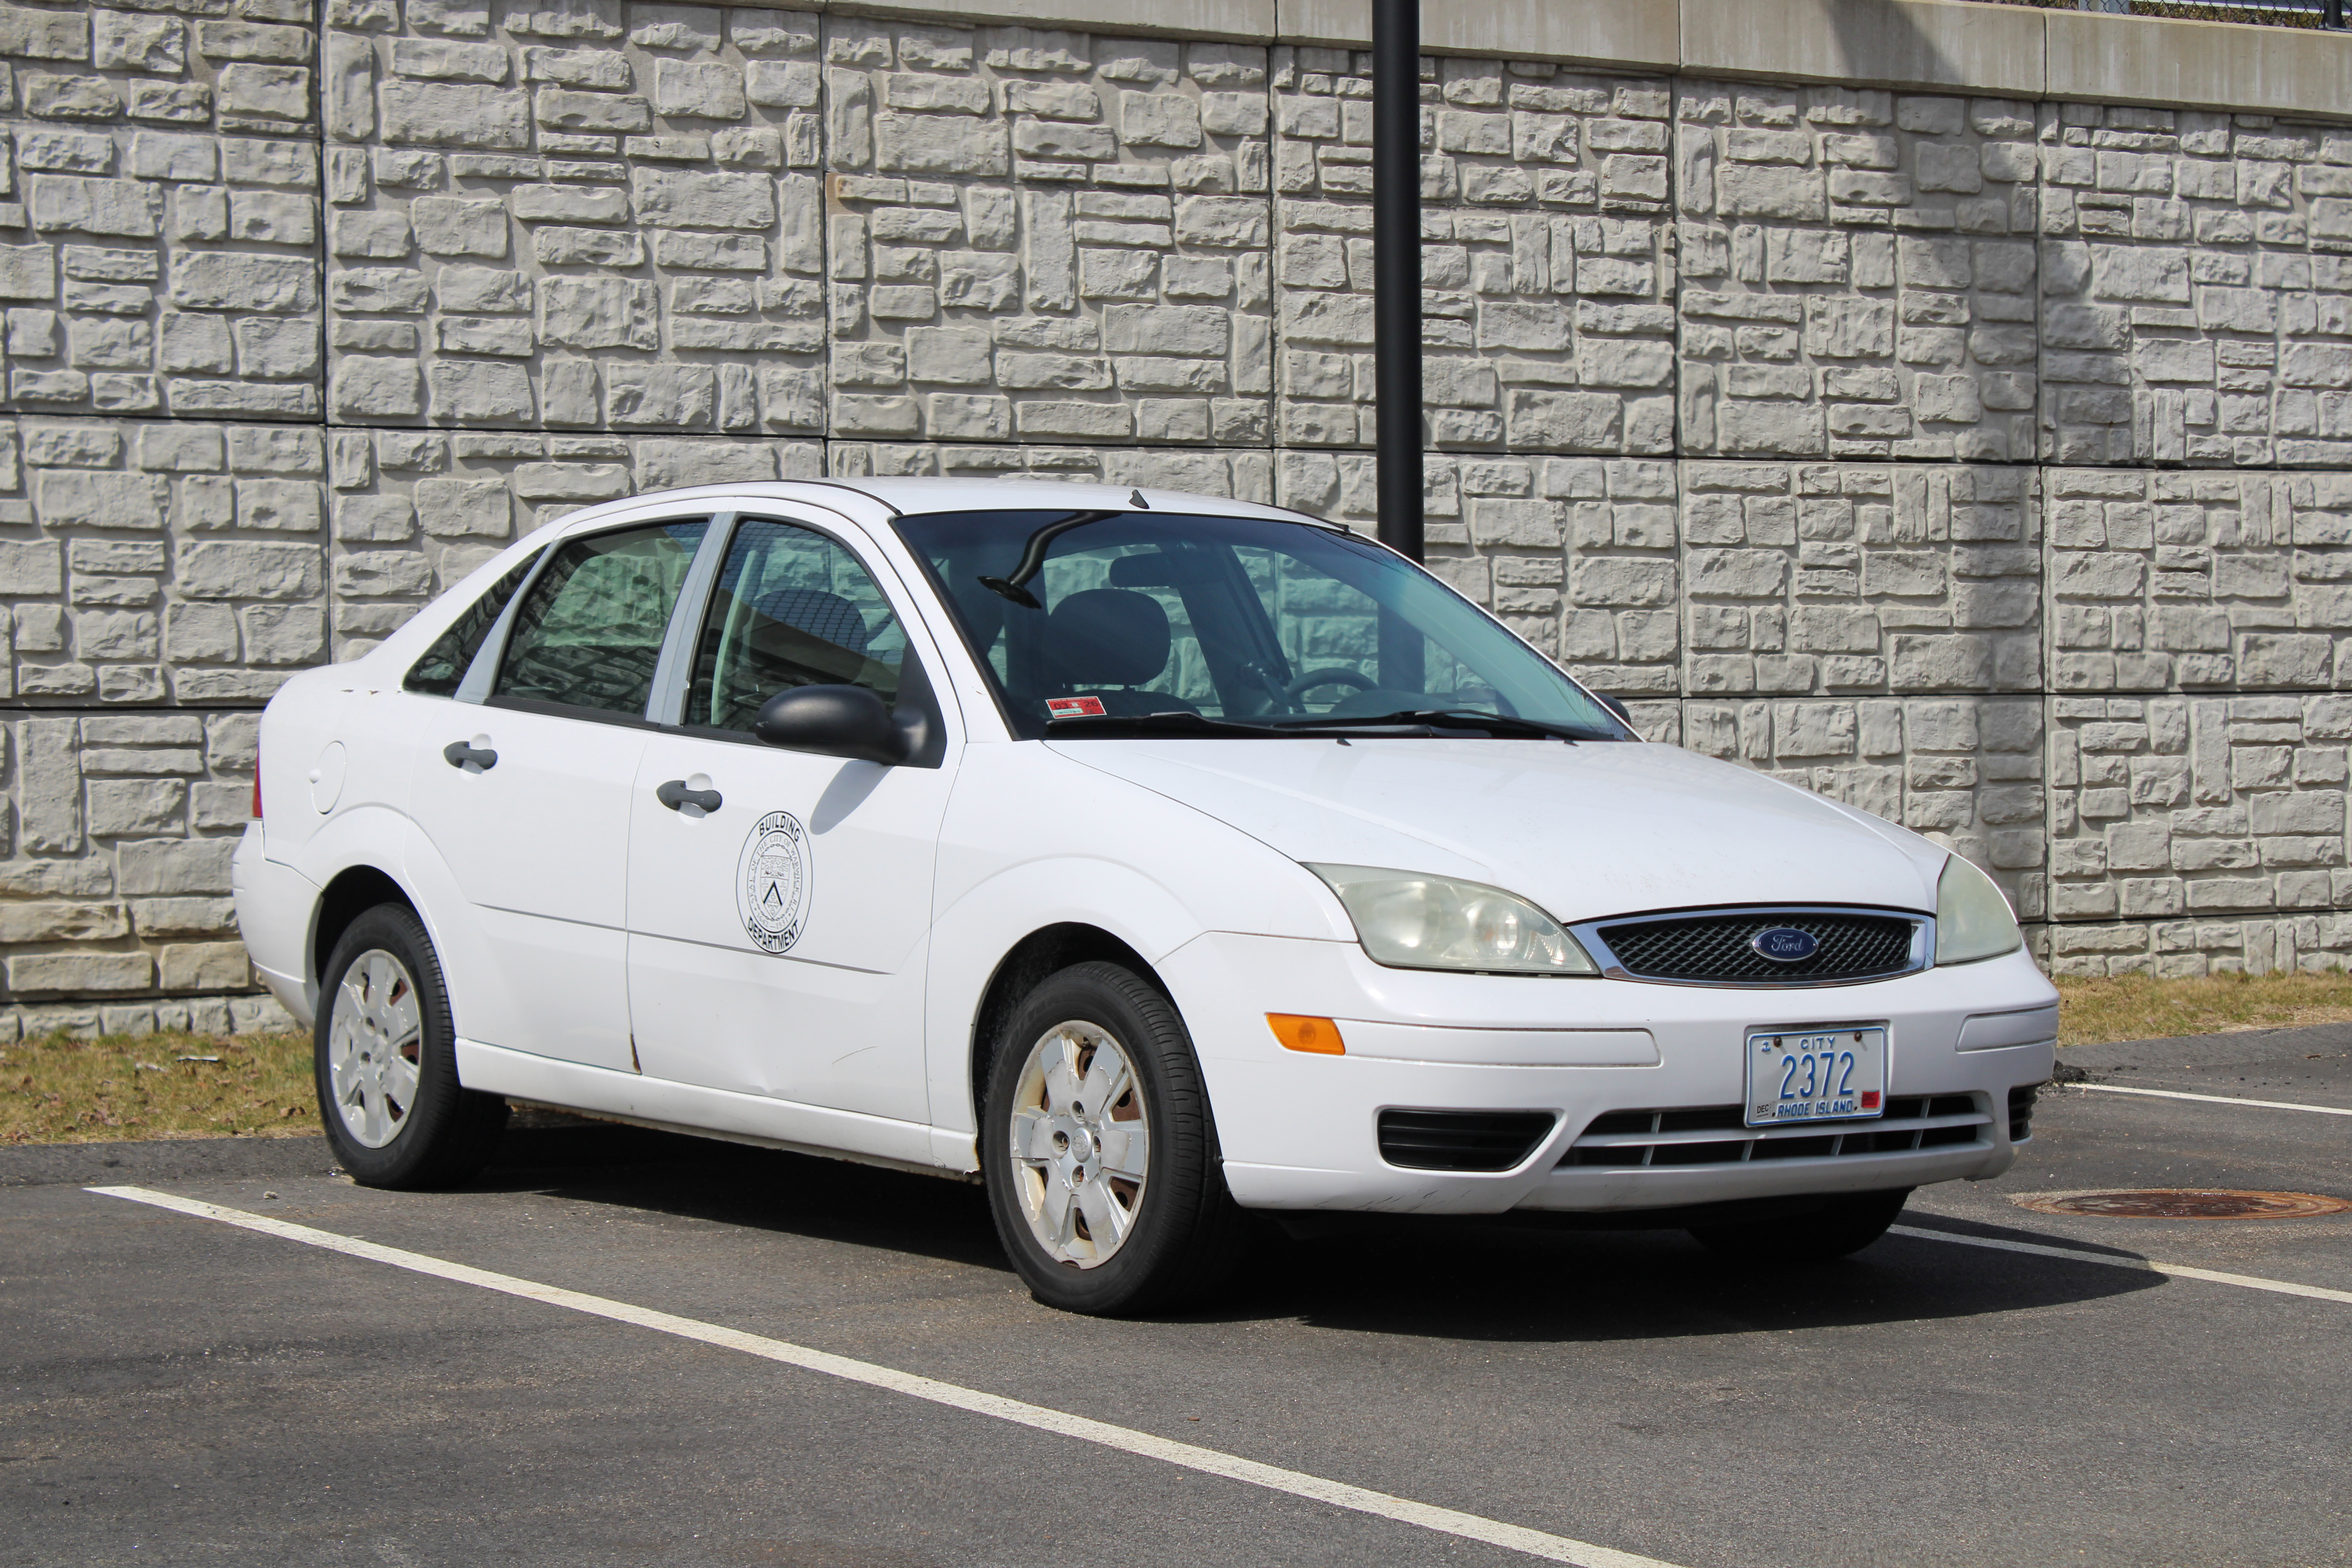 A photo  of Warwick Public Works
            Car 2372, a 1998-2007 Ford Focus             taken by @riemergencyvehicles